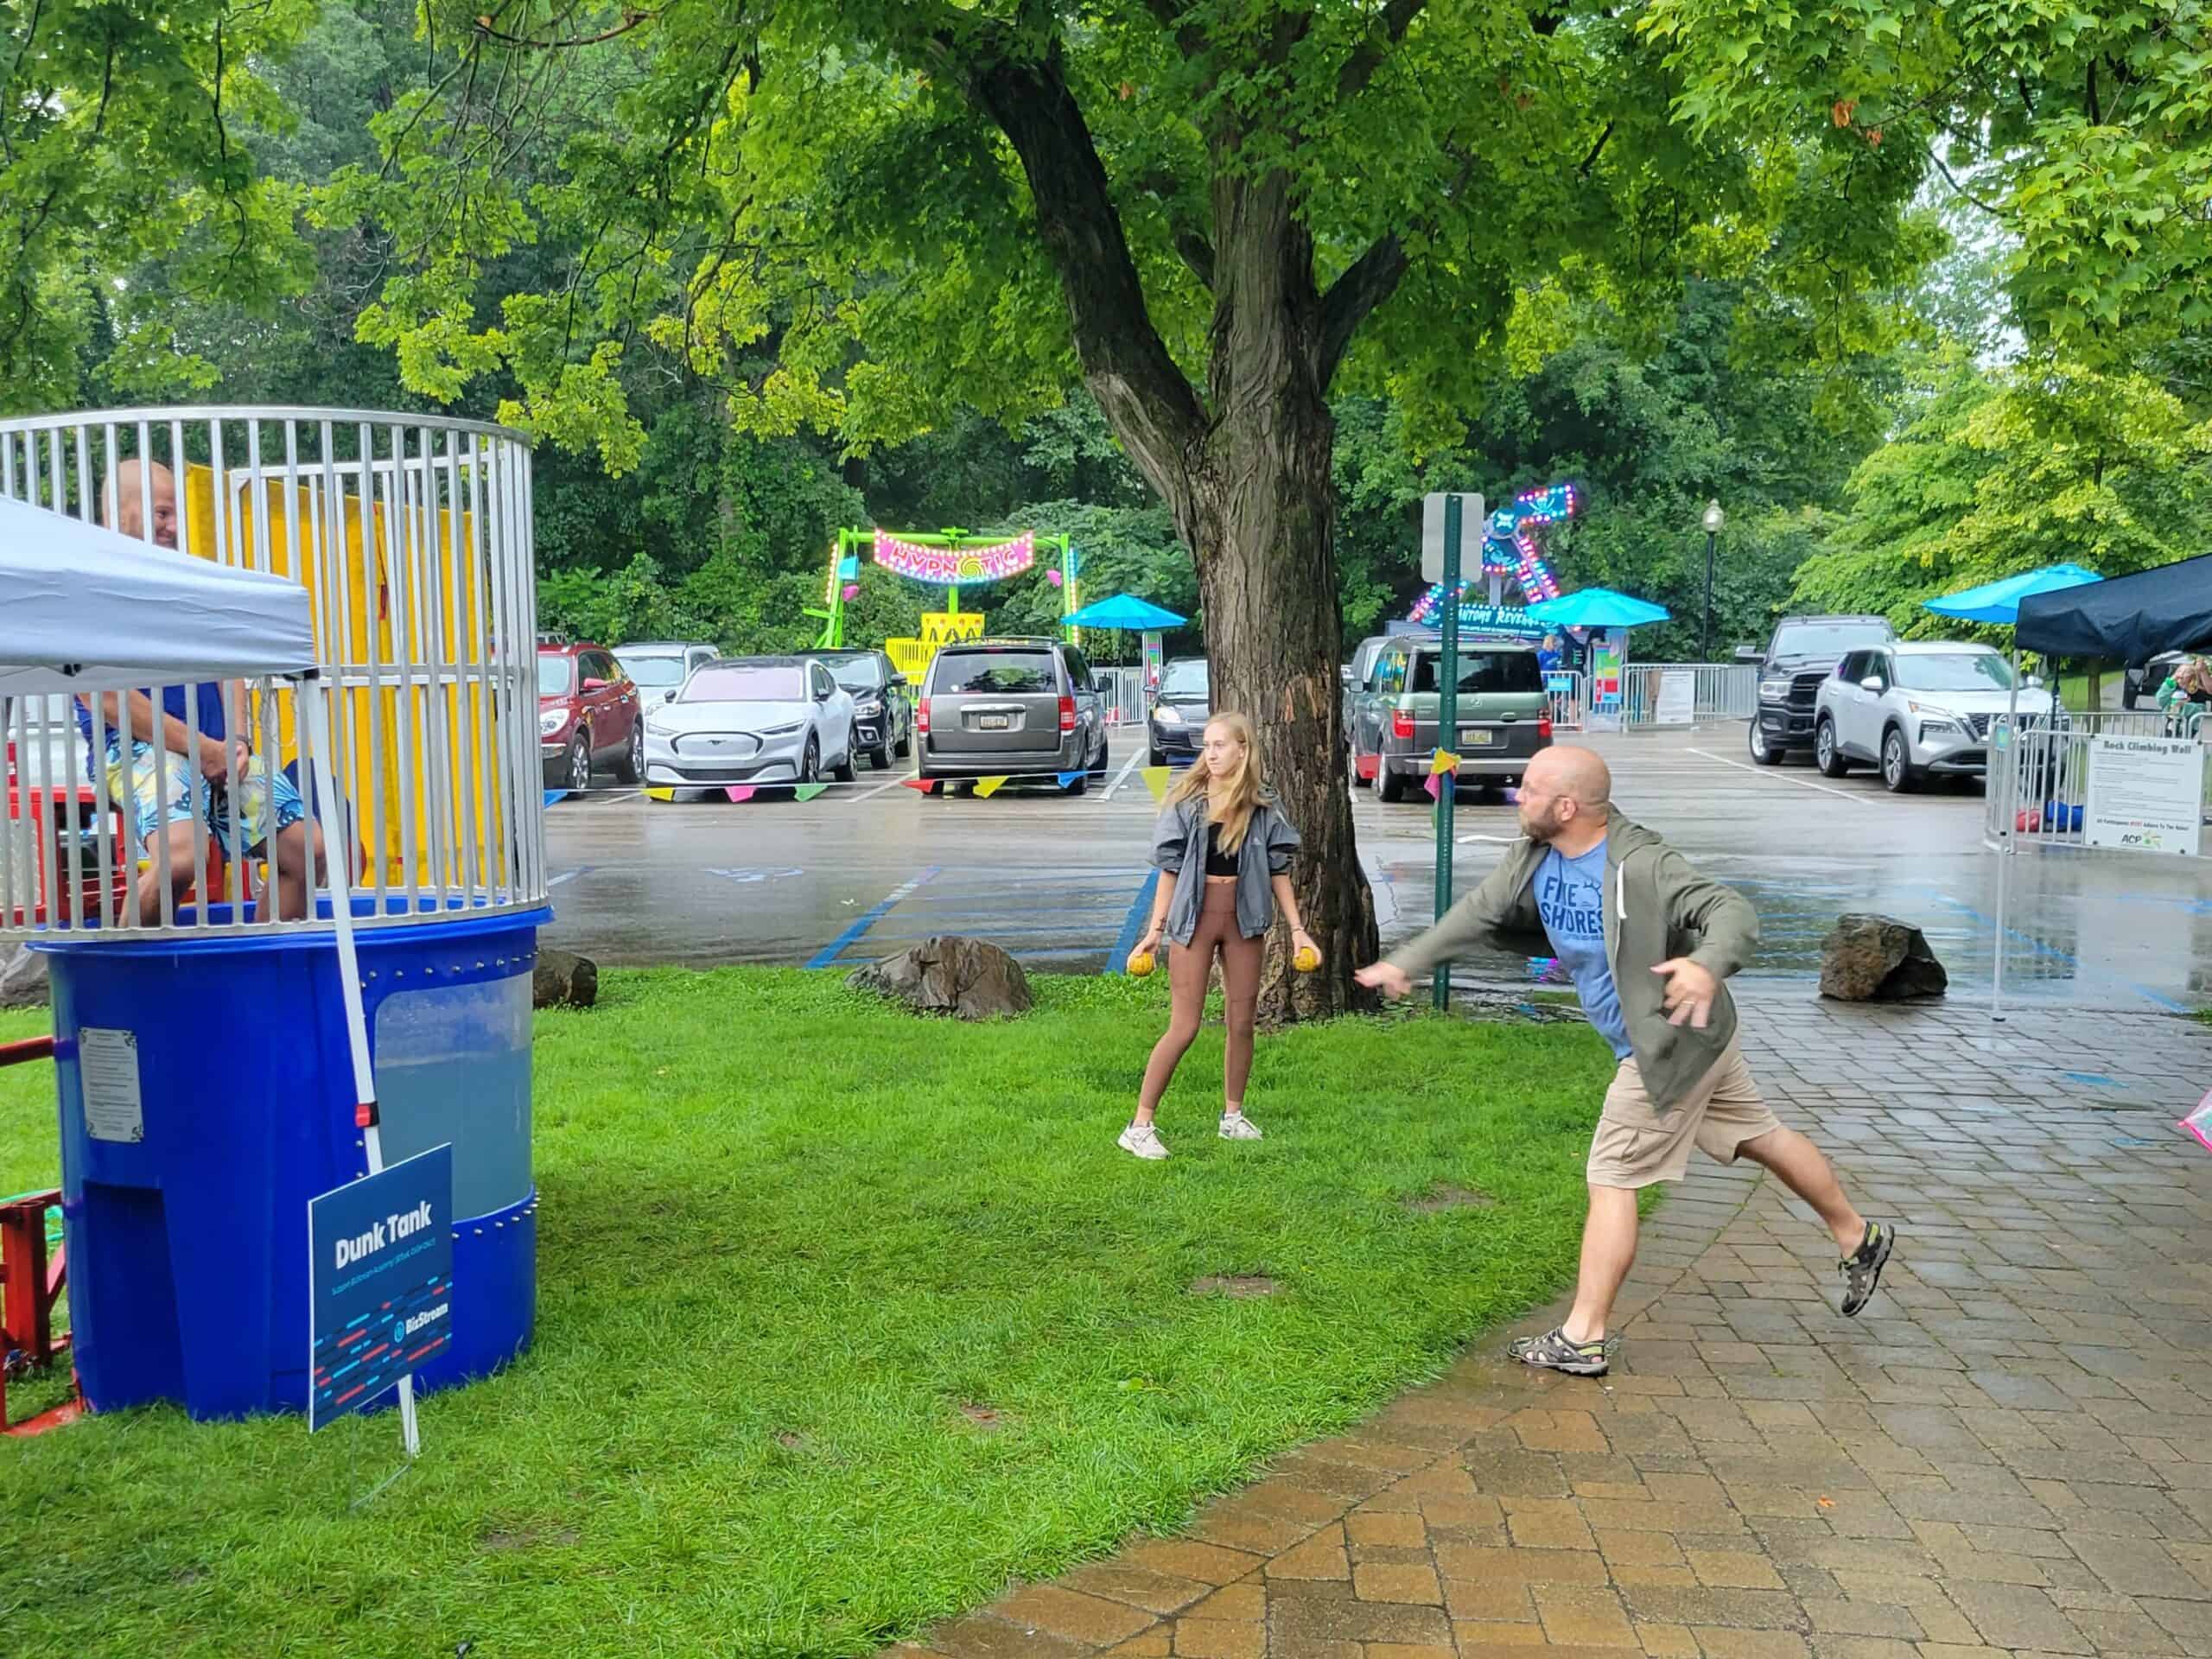 Person throwing a ball at a dunk tank